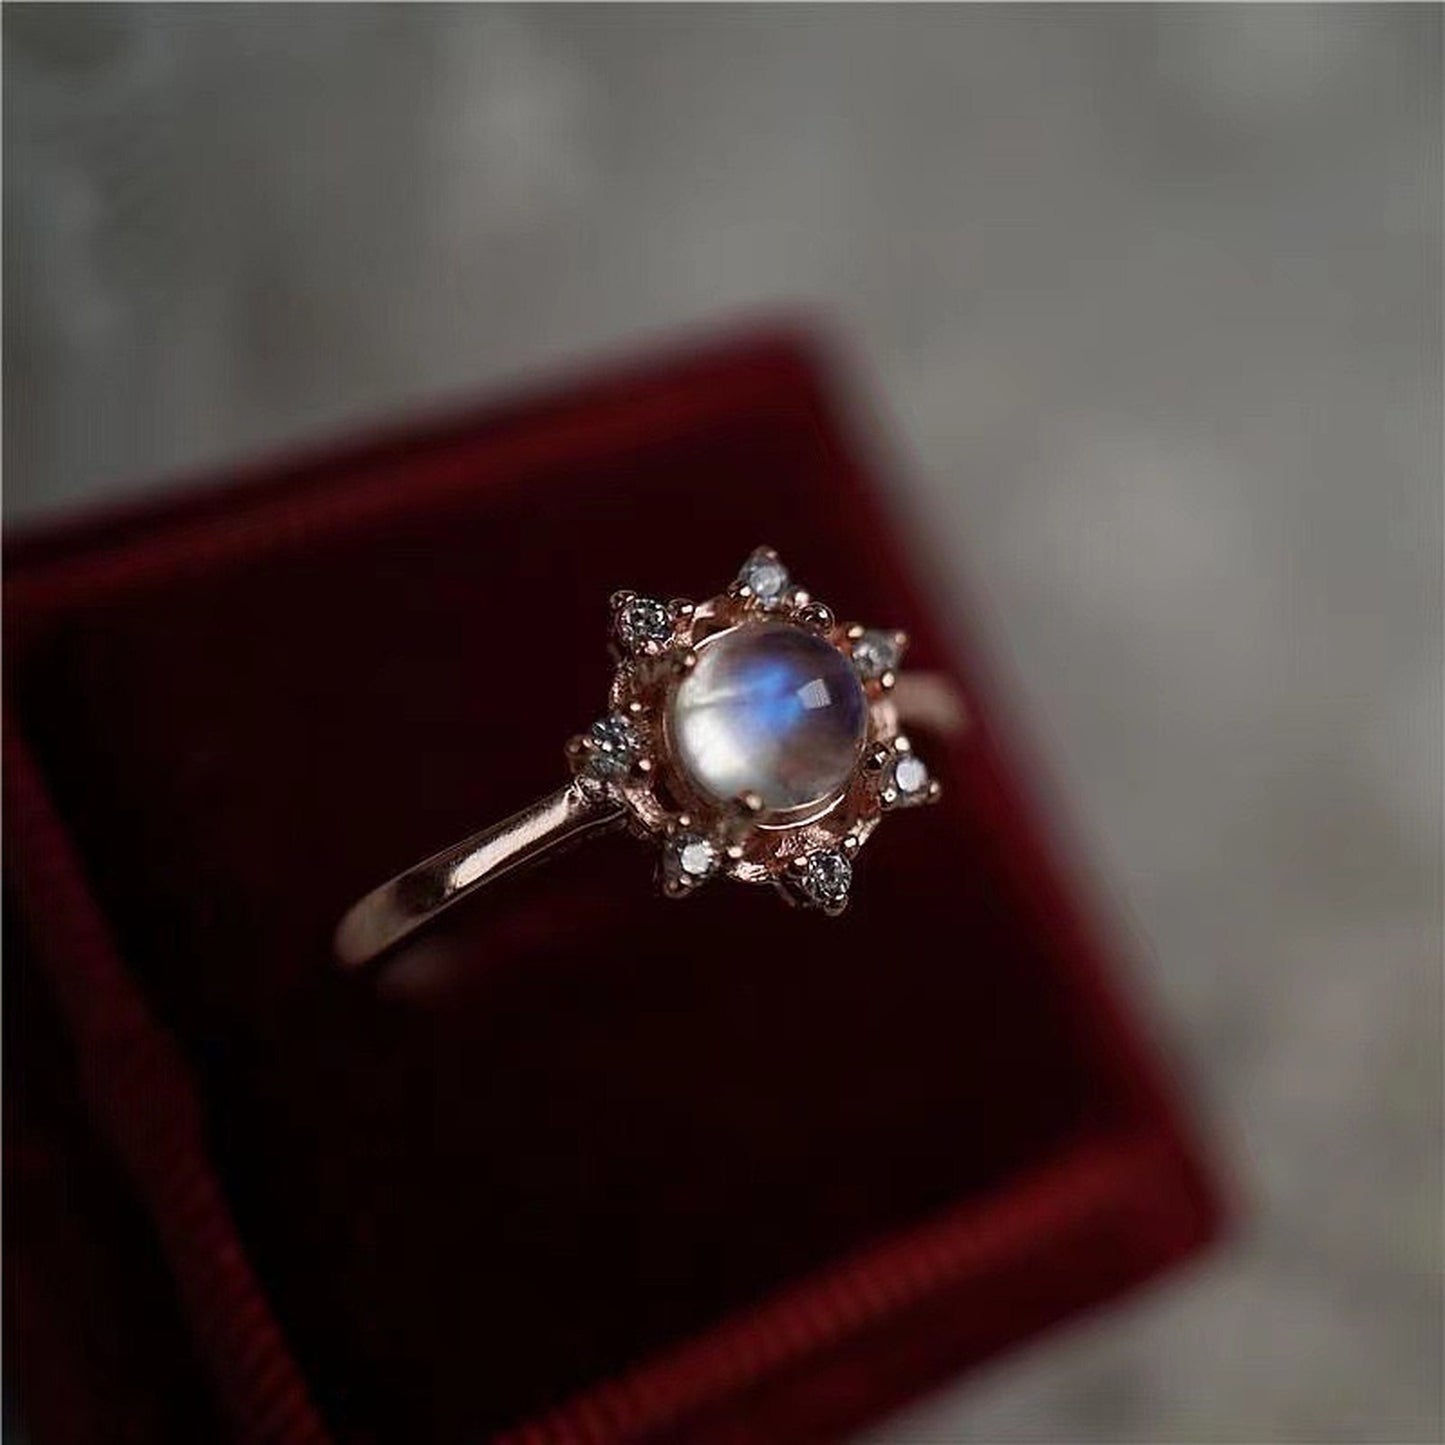 Rose gold moonstone ring, Flower gemstone ring, Snowflake ring, Statement birthstone rings, Opal rings, Cz floral rings, Birthday ring gifts